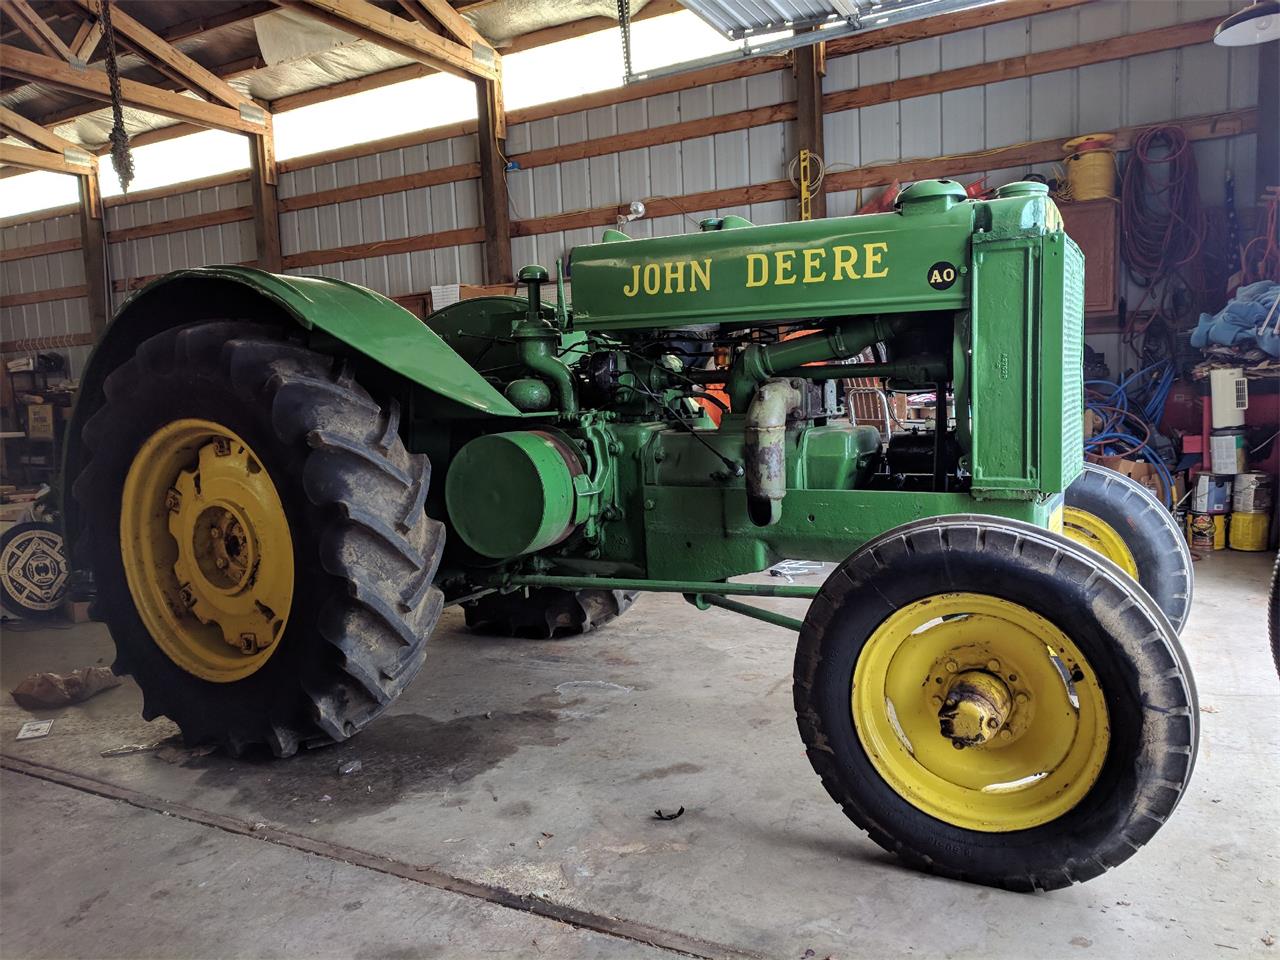 For Sale at Auction: 1943 John Deere Tractor for sale in Billings, MT